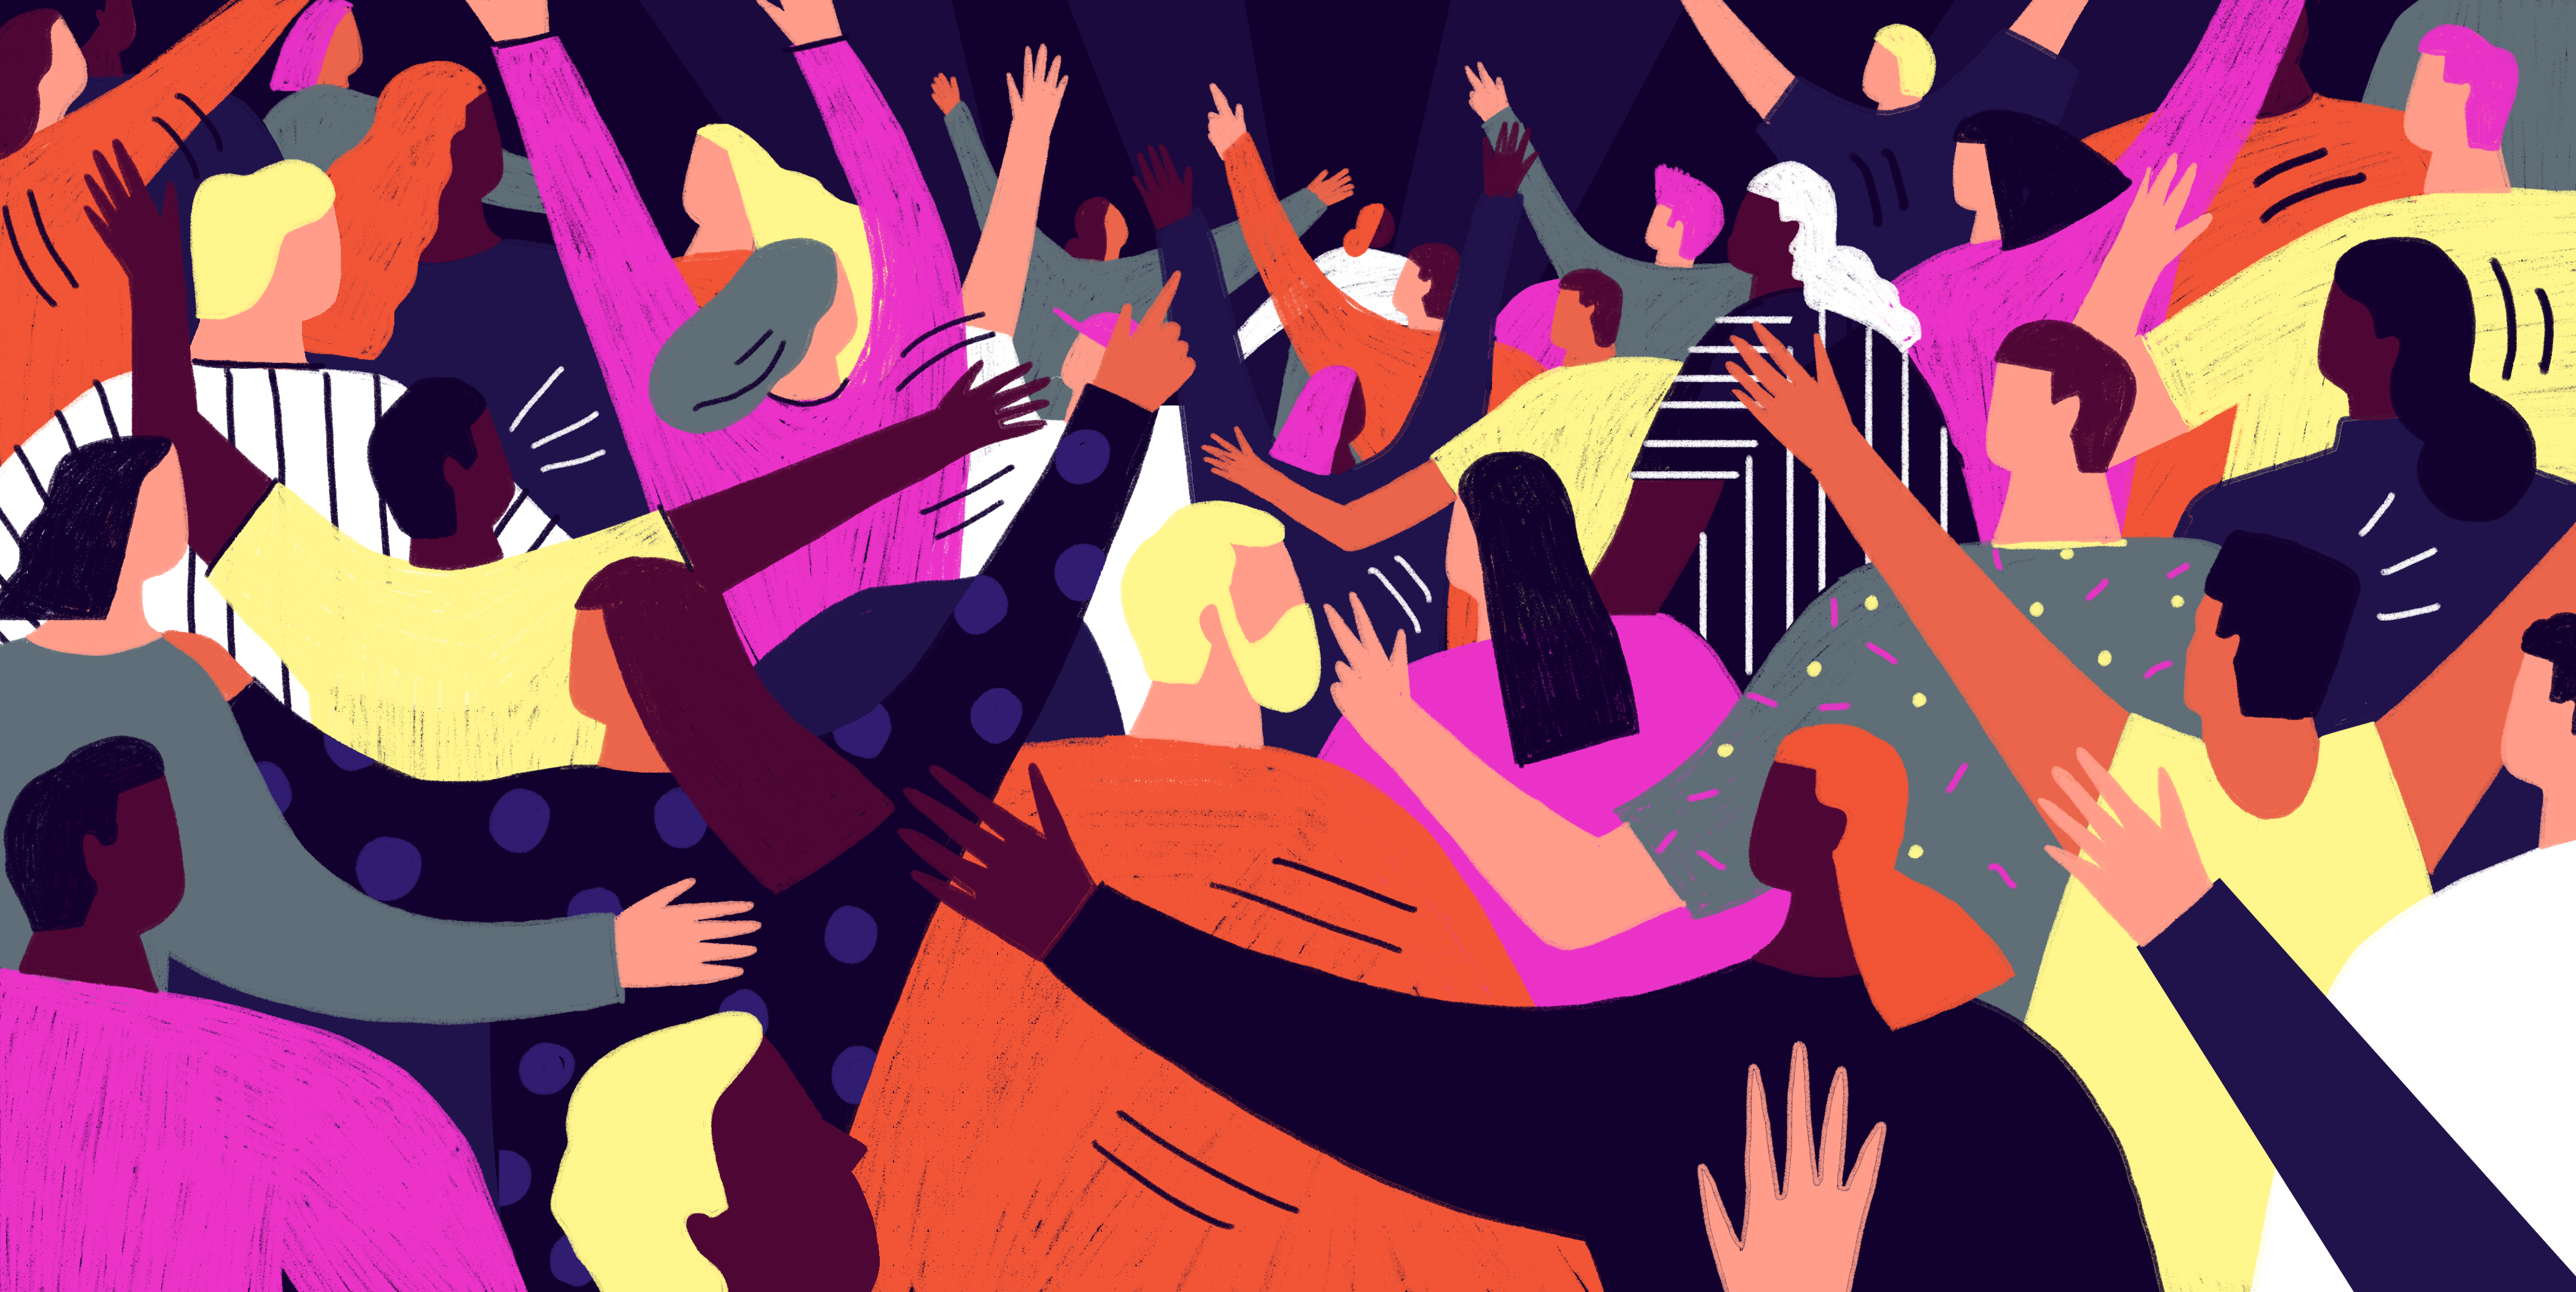 An illustration of a group of people attending a music festival